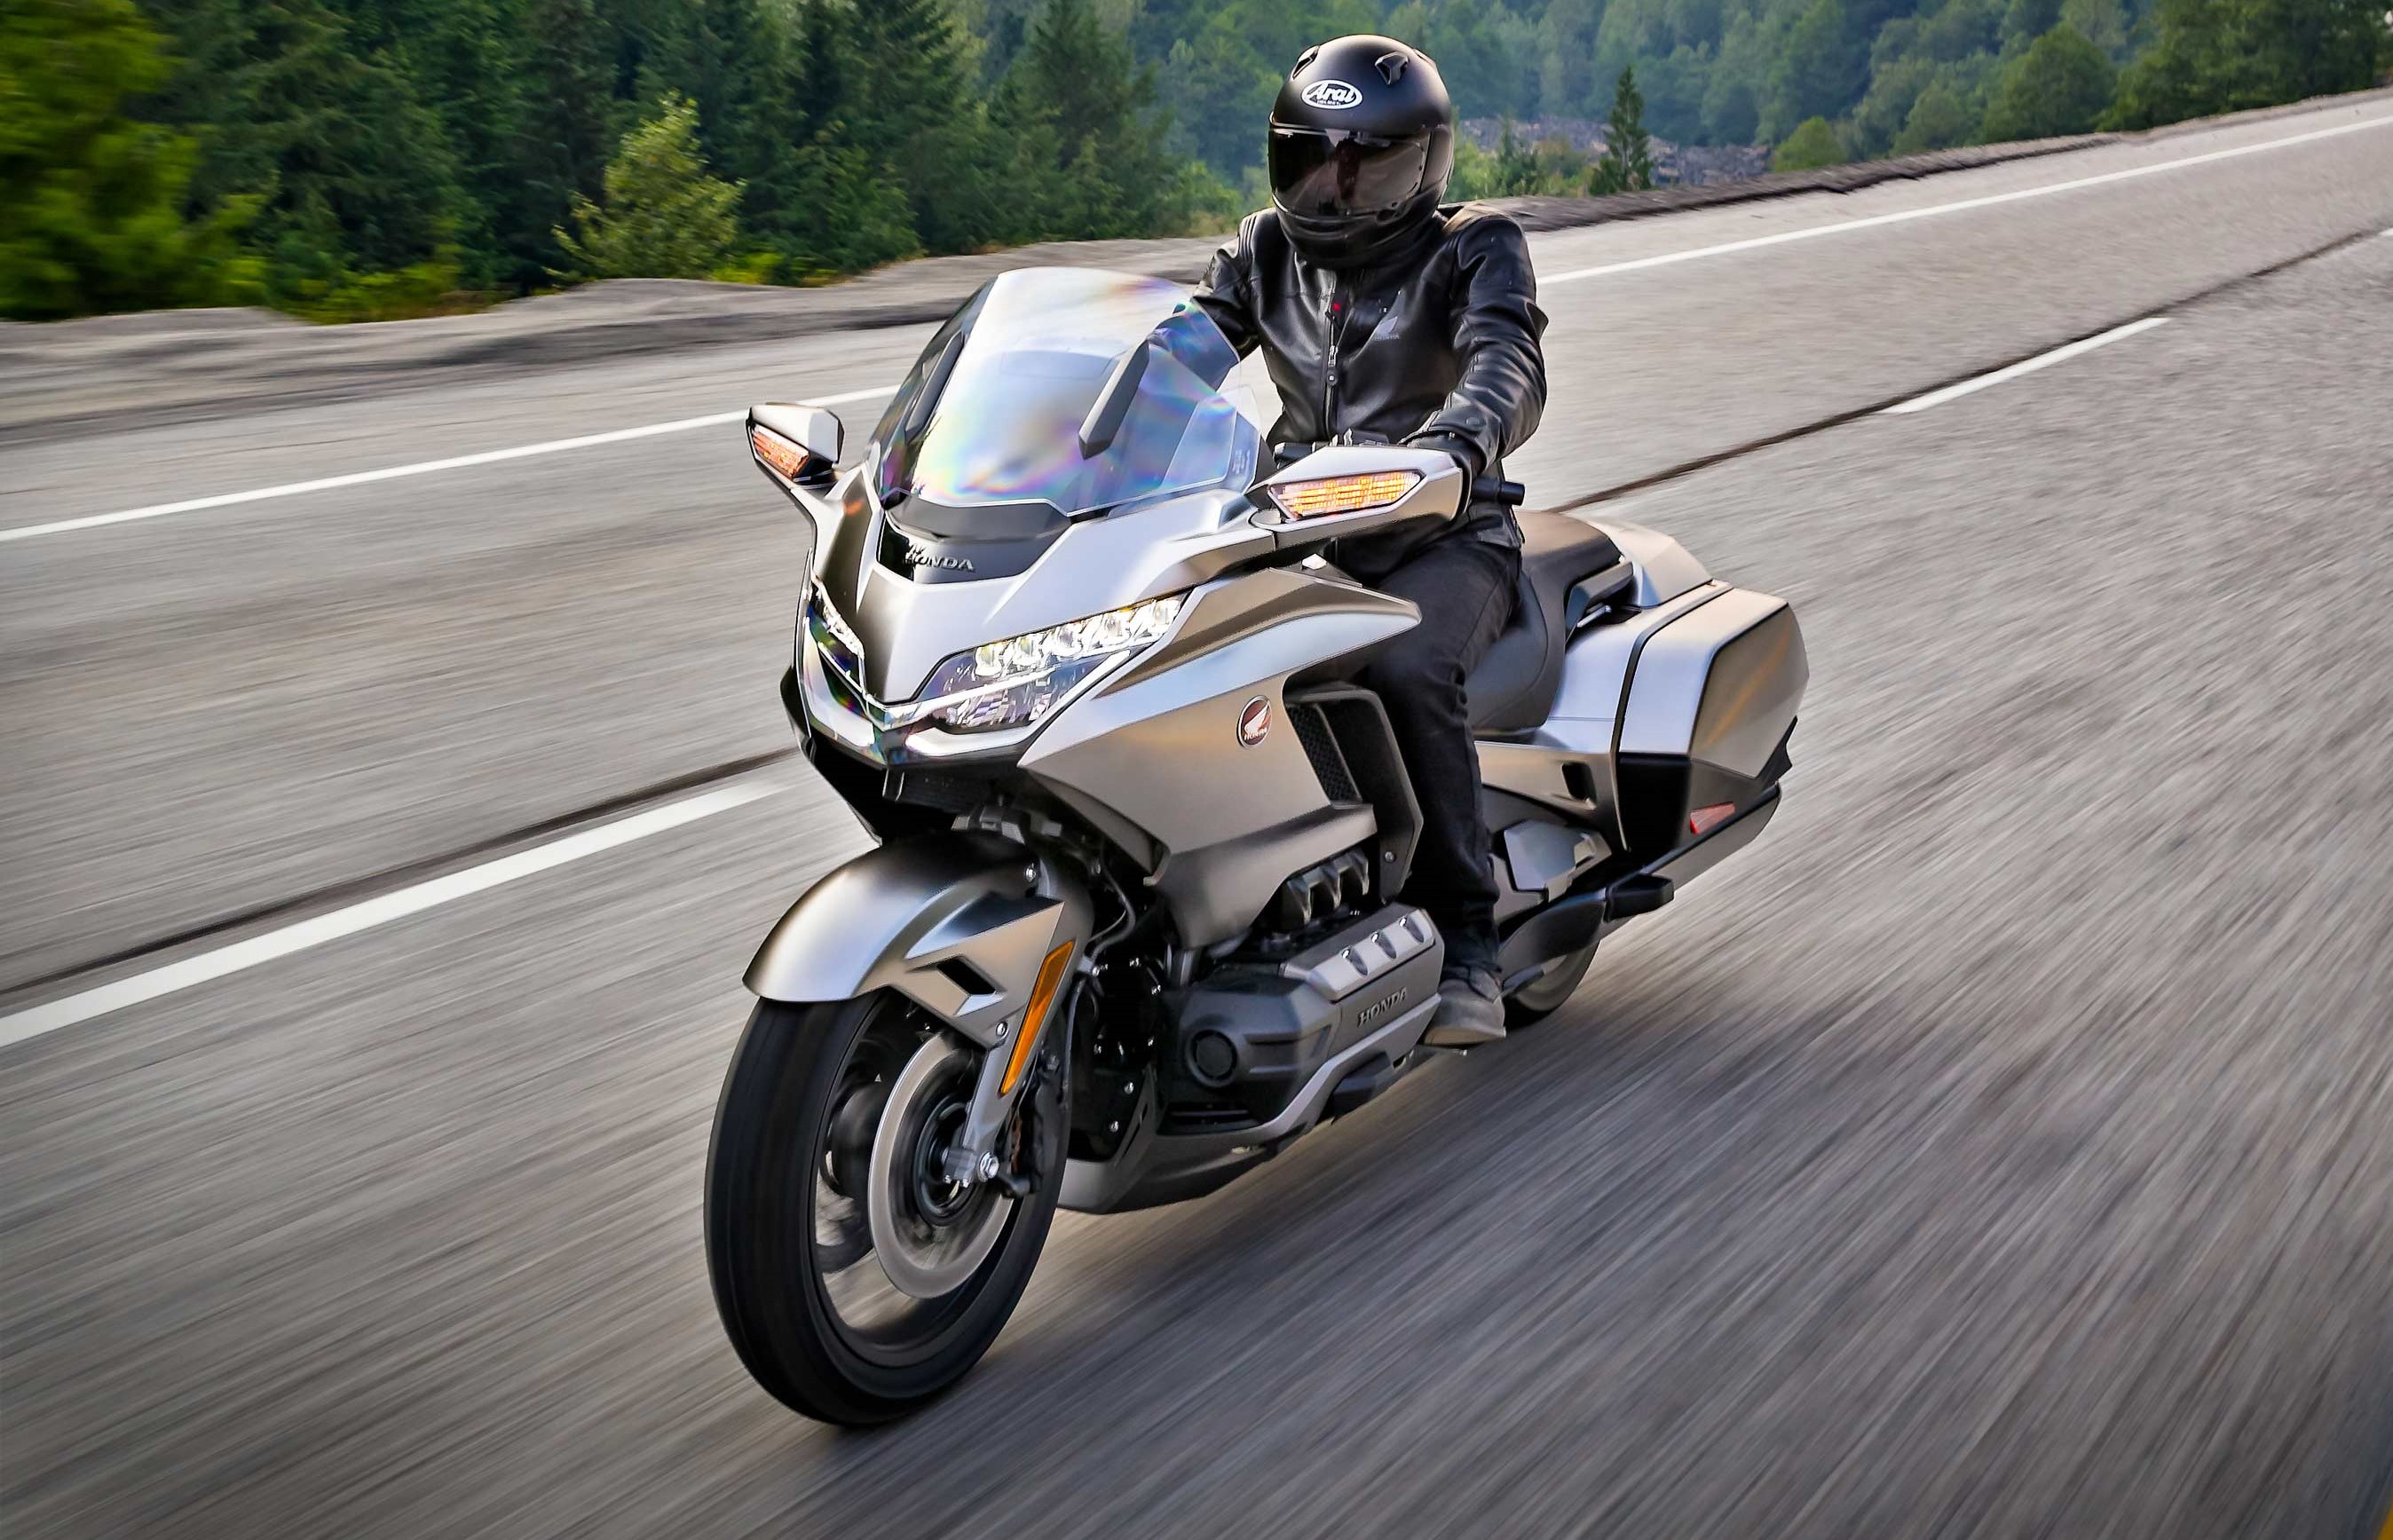 Best Motorcycles For Long Distance Touring Reviewmotors.co